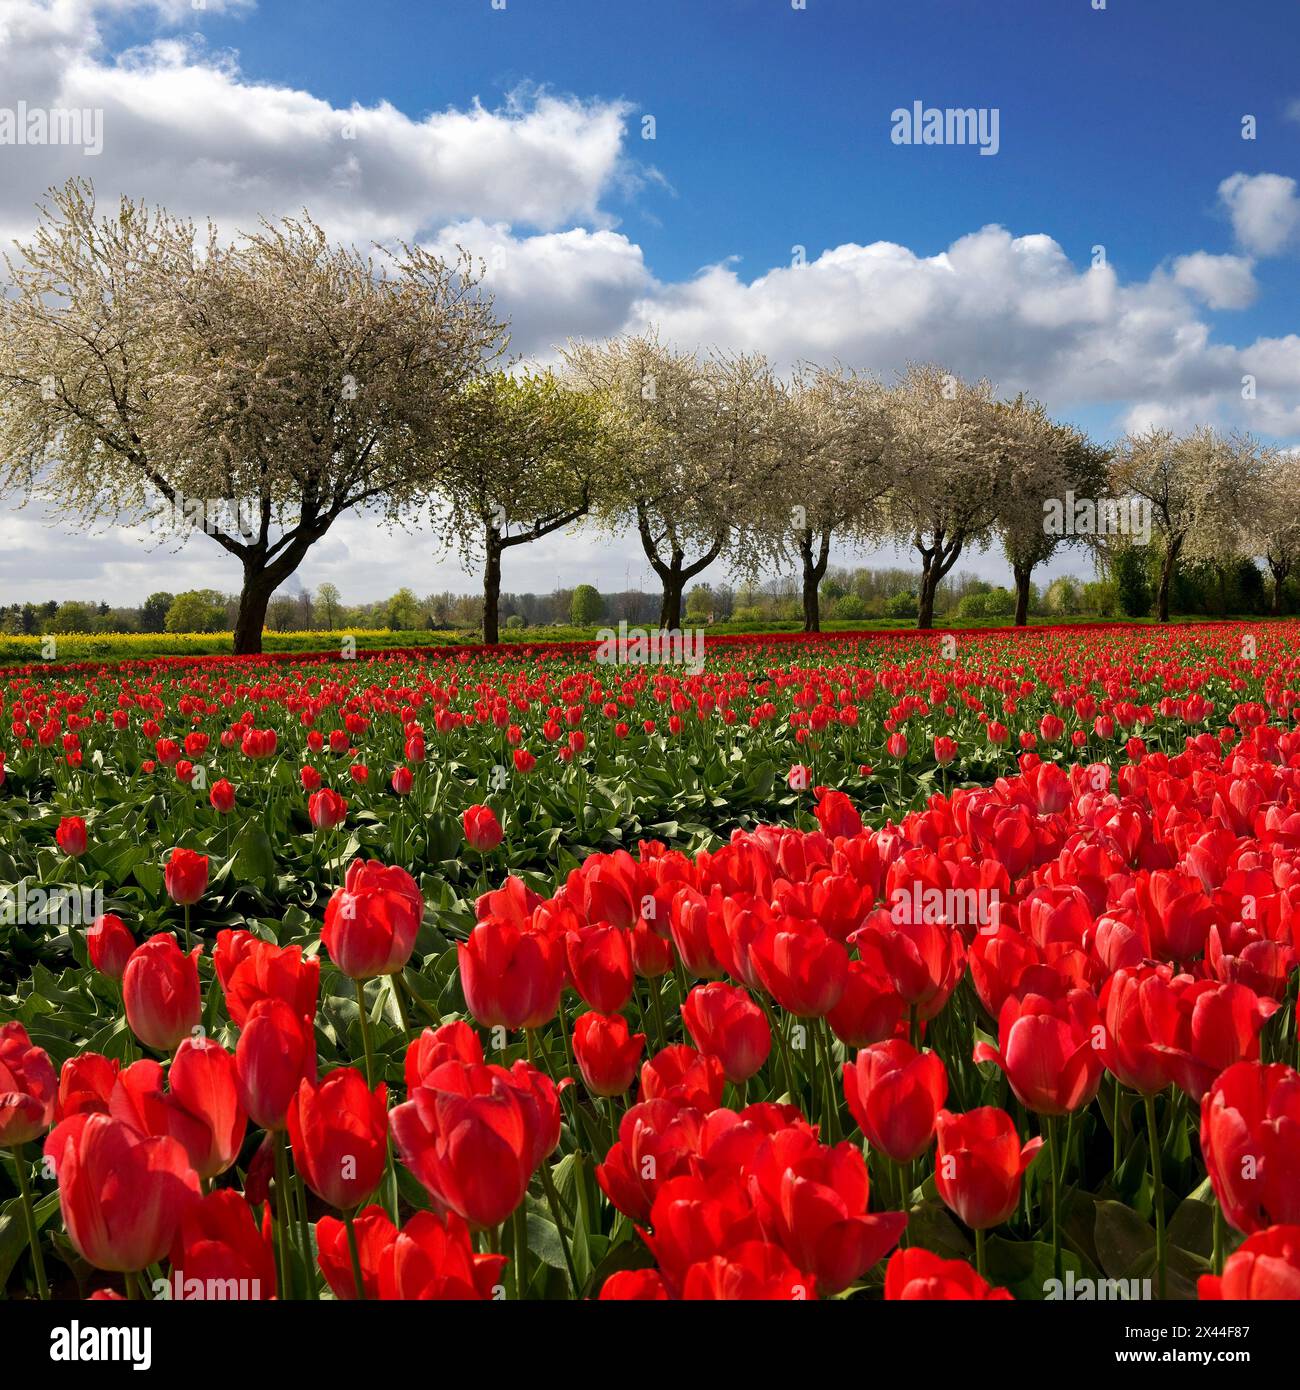 Tulip field in front of blossoming fruit trees, Grevenbroich, Lower Rhine, North Rhine-Westphalia, Germany Stock Photo